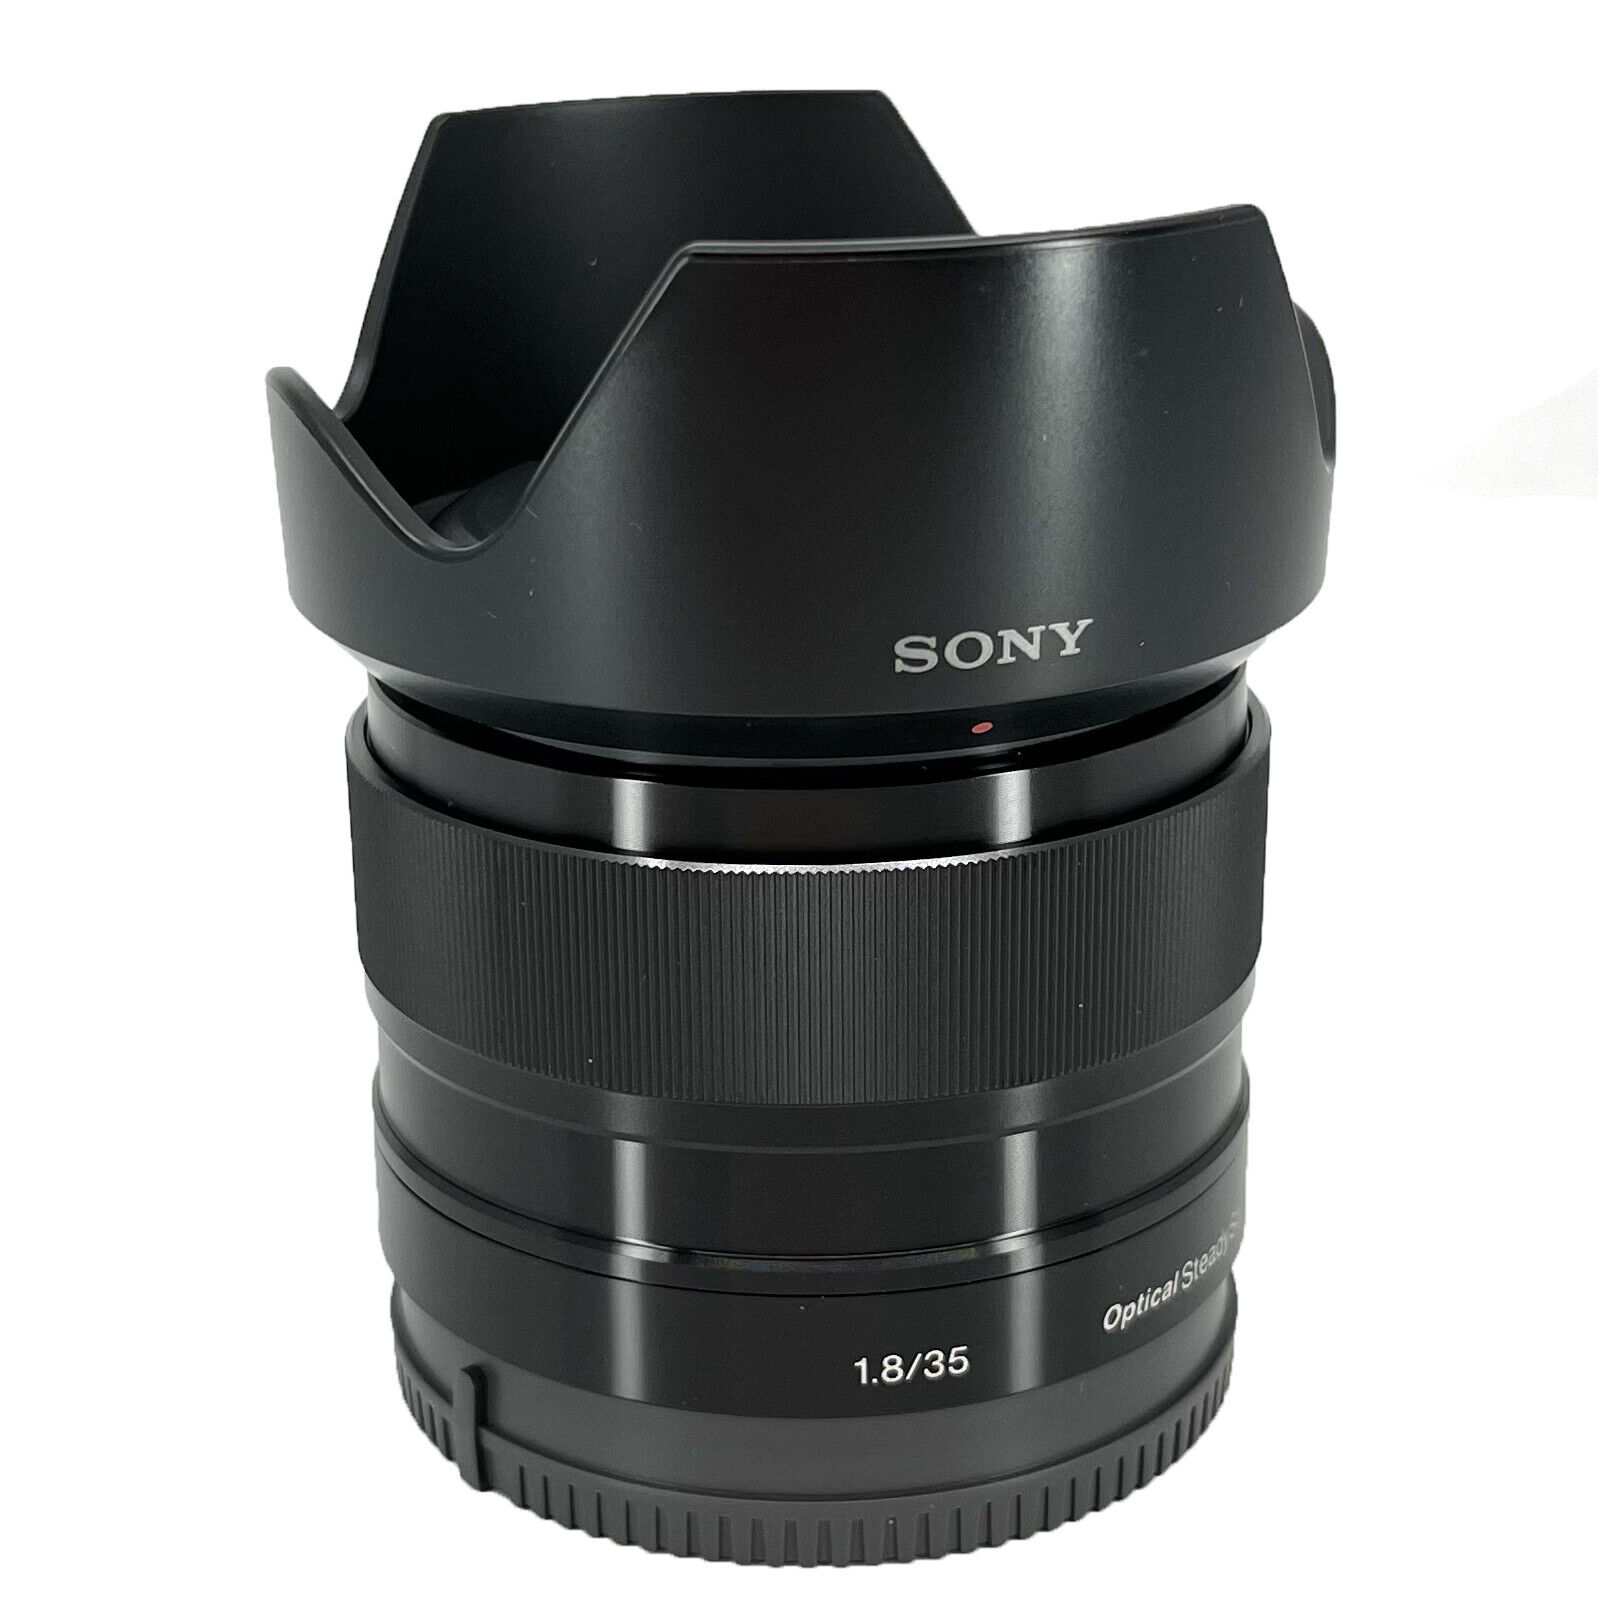 Sony E 35mm f/1.8 OSS Lens - SEL35F18 - FAST FREE 2-3 BUSINESS DAY SHIPPING -NEW